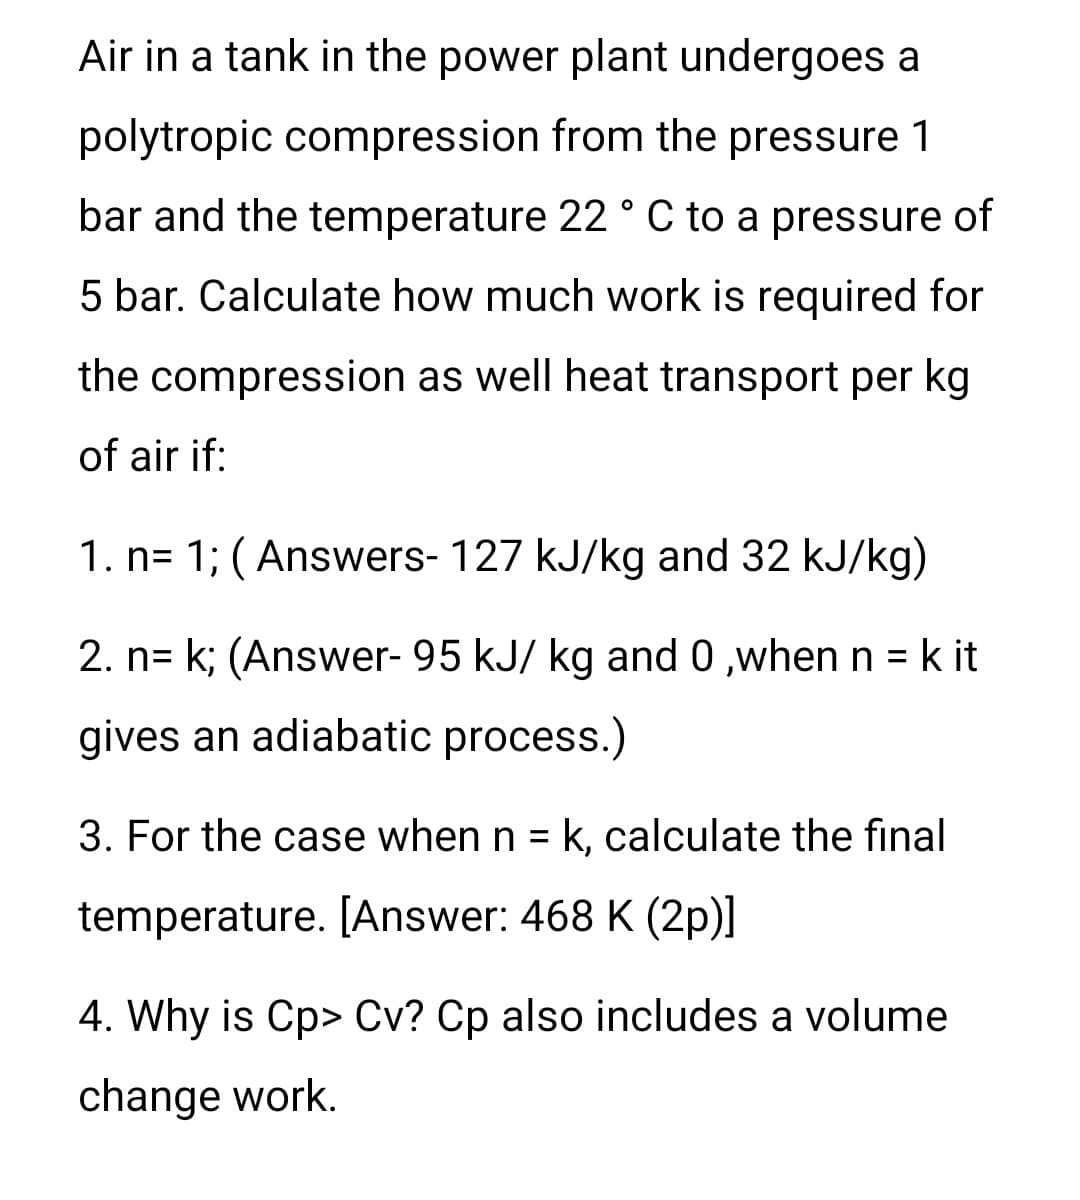 Air in a tank in the power plant undergoes a
polytropic compression from the pressure 1
bar and the temperature 22 ° C to a pressure of
5 bar. Calculate how much work is required for
the compression as well heat transport per kg
of air if:
1. n= 1; (Answers- 127 kJ/kg and 32 kJ/kg)
2. n= k; (Answer- 95 kJ/ kg and 0,when n = k it
gives an adiabatic process.)
3. For the case when n = k, calculate the final
temperature. [Answer: 468 K (2p)]
4. Why is Cp> Cv? Cp also includes a volume
change work.